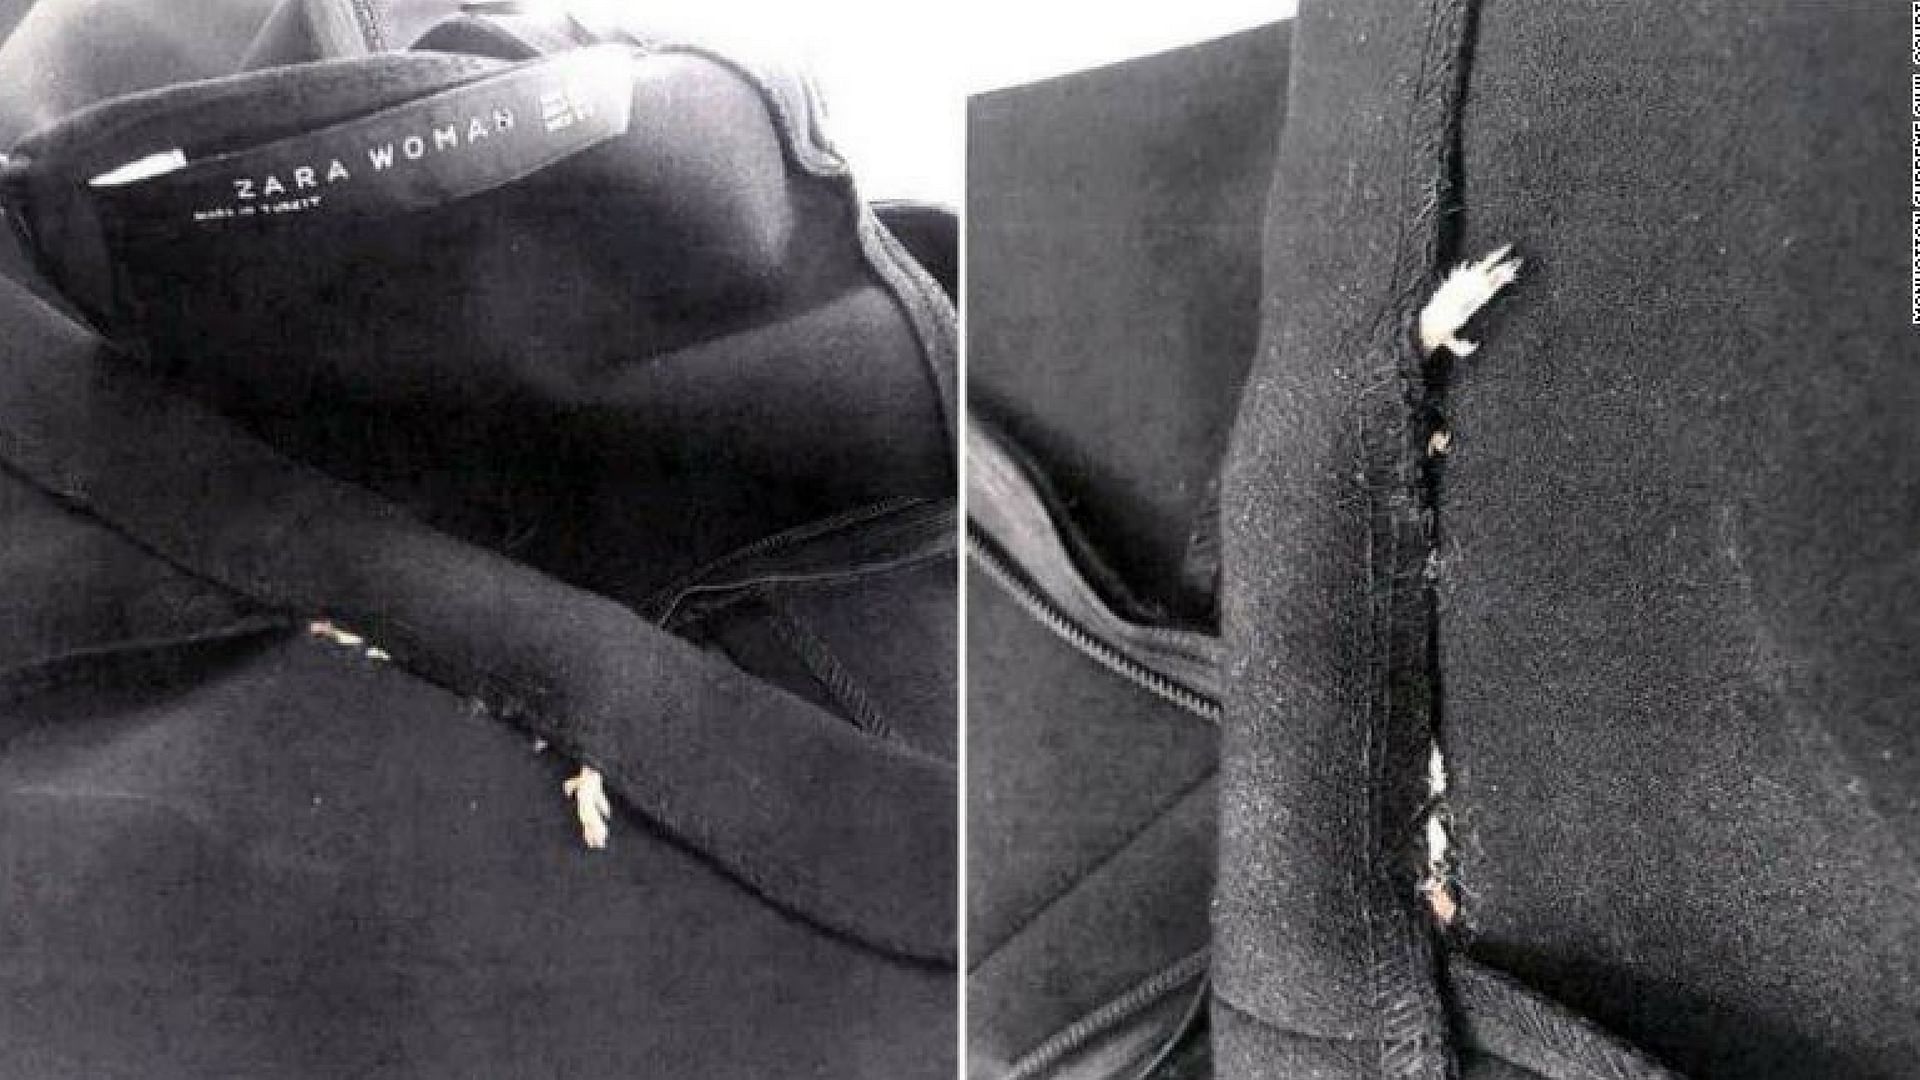 A woman in New York claimed she found a dead mouse sewn into her dress. (Photo Courtesy: Twitter/<a href="https://twitter.com/KTLA">@KTLA</a>)